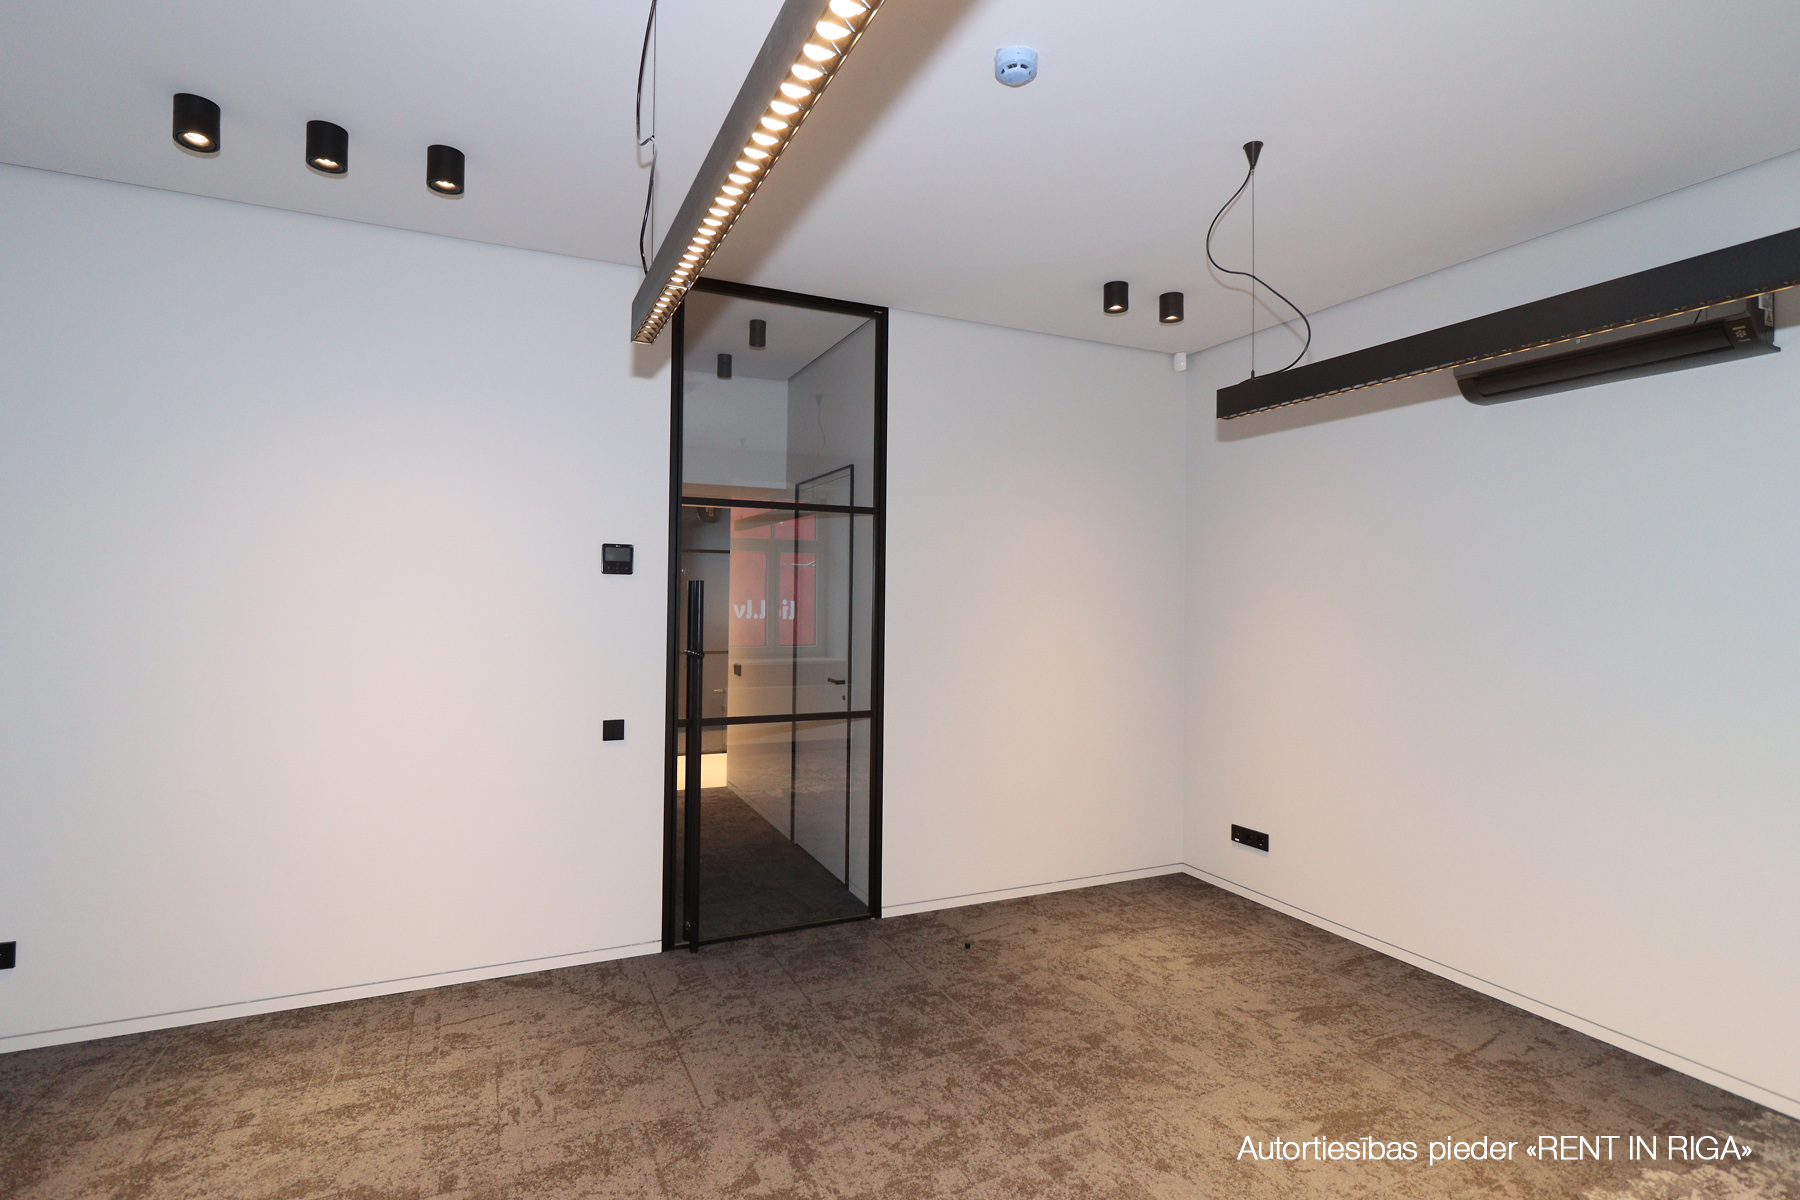 Office for rent, Miera street - Image 1